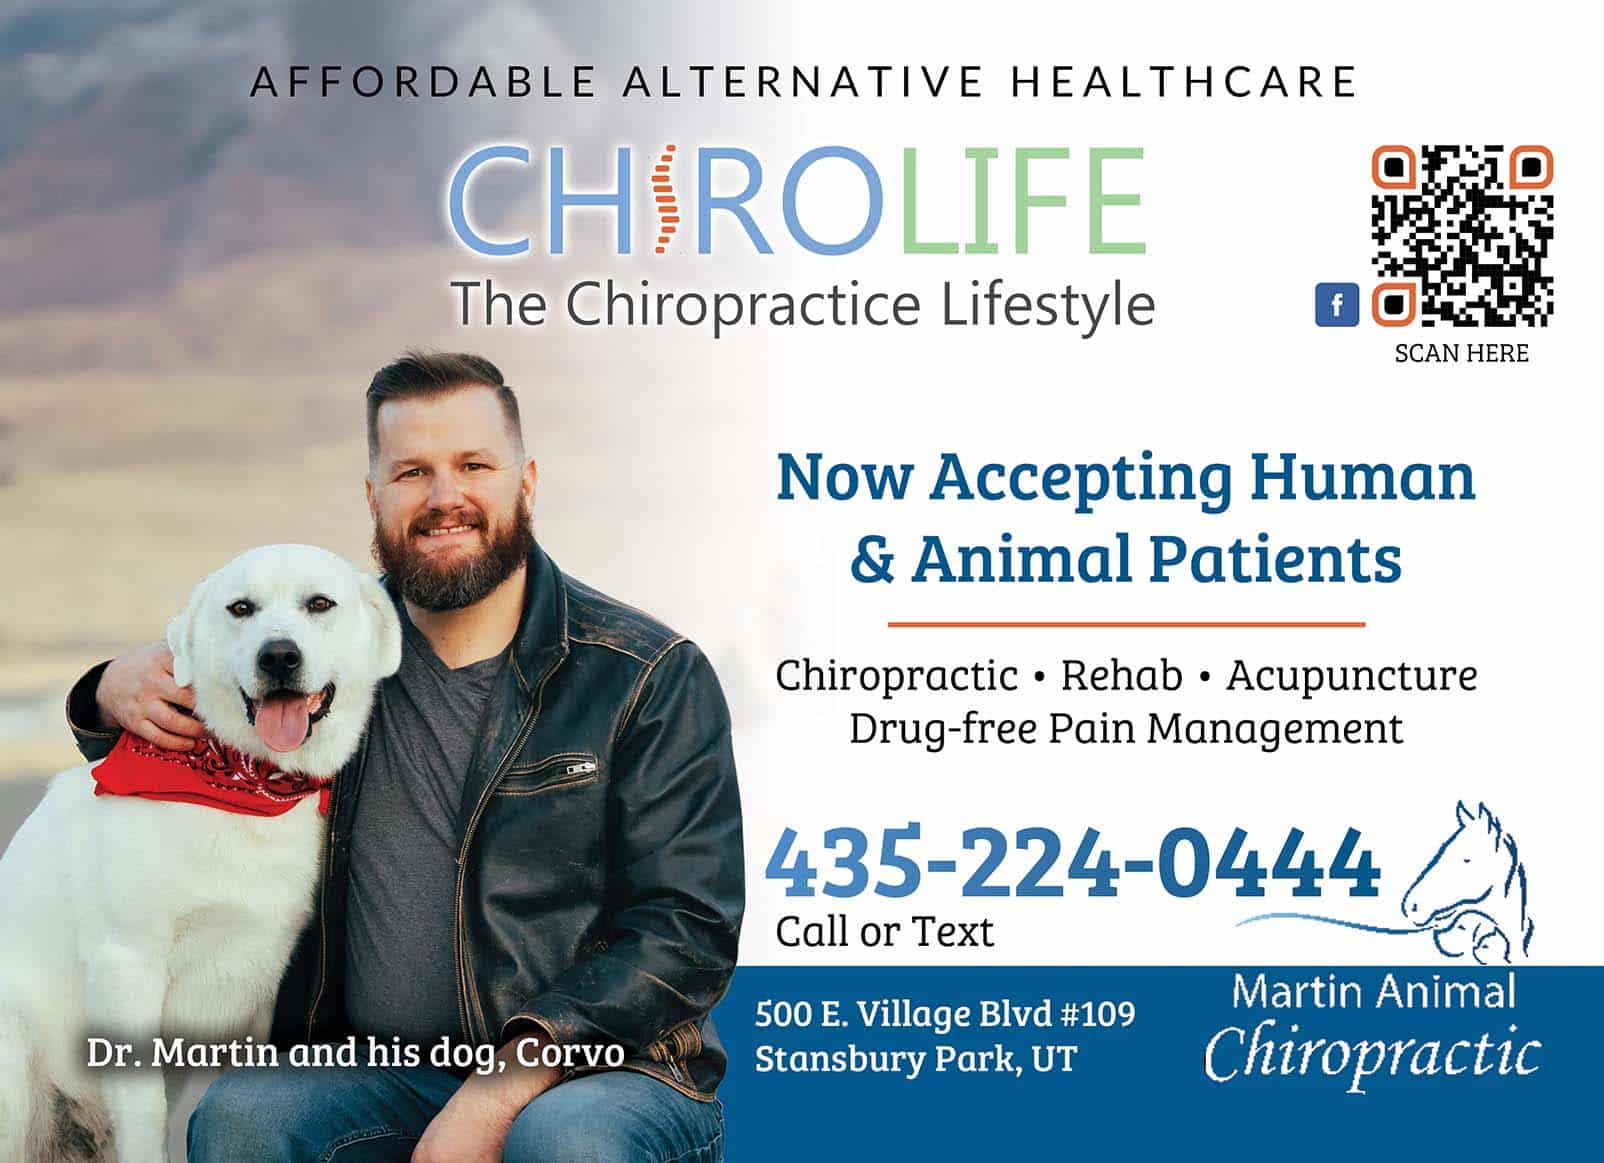 ChiroLife Now Accepting Human & Animal Patients - 435-224-0444